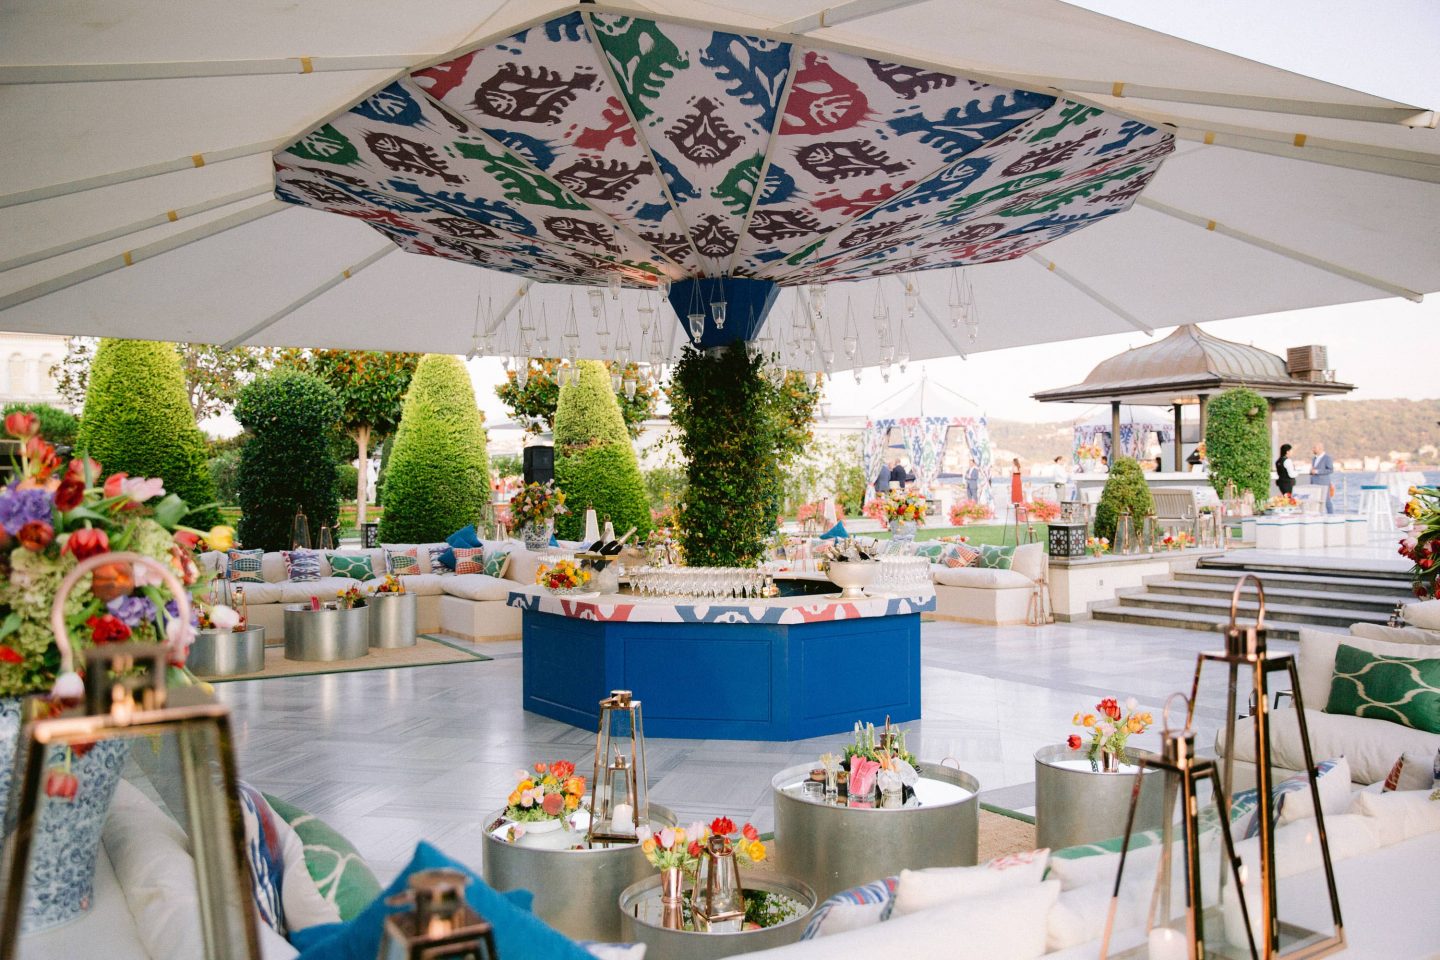 Bright and colorful welcome party tent details at this Istanbul wedding weekend at Four Seasons Bosphorus | Photo by Allan Zepeda